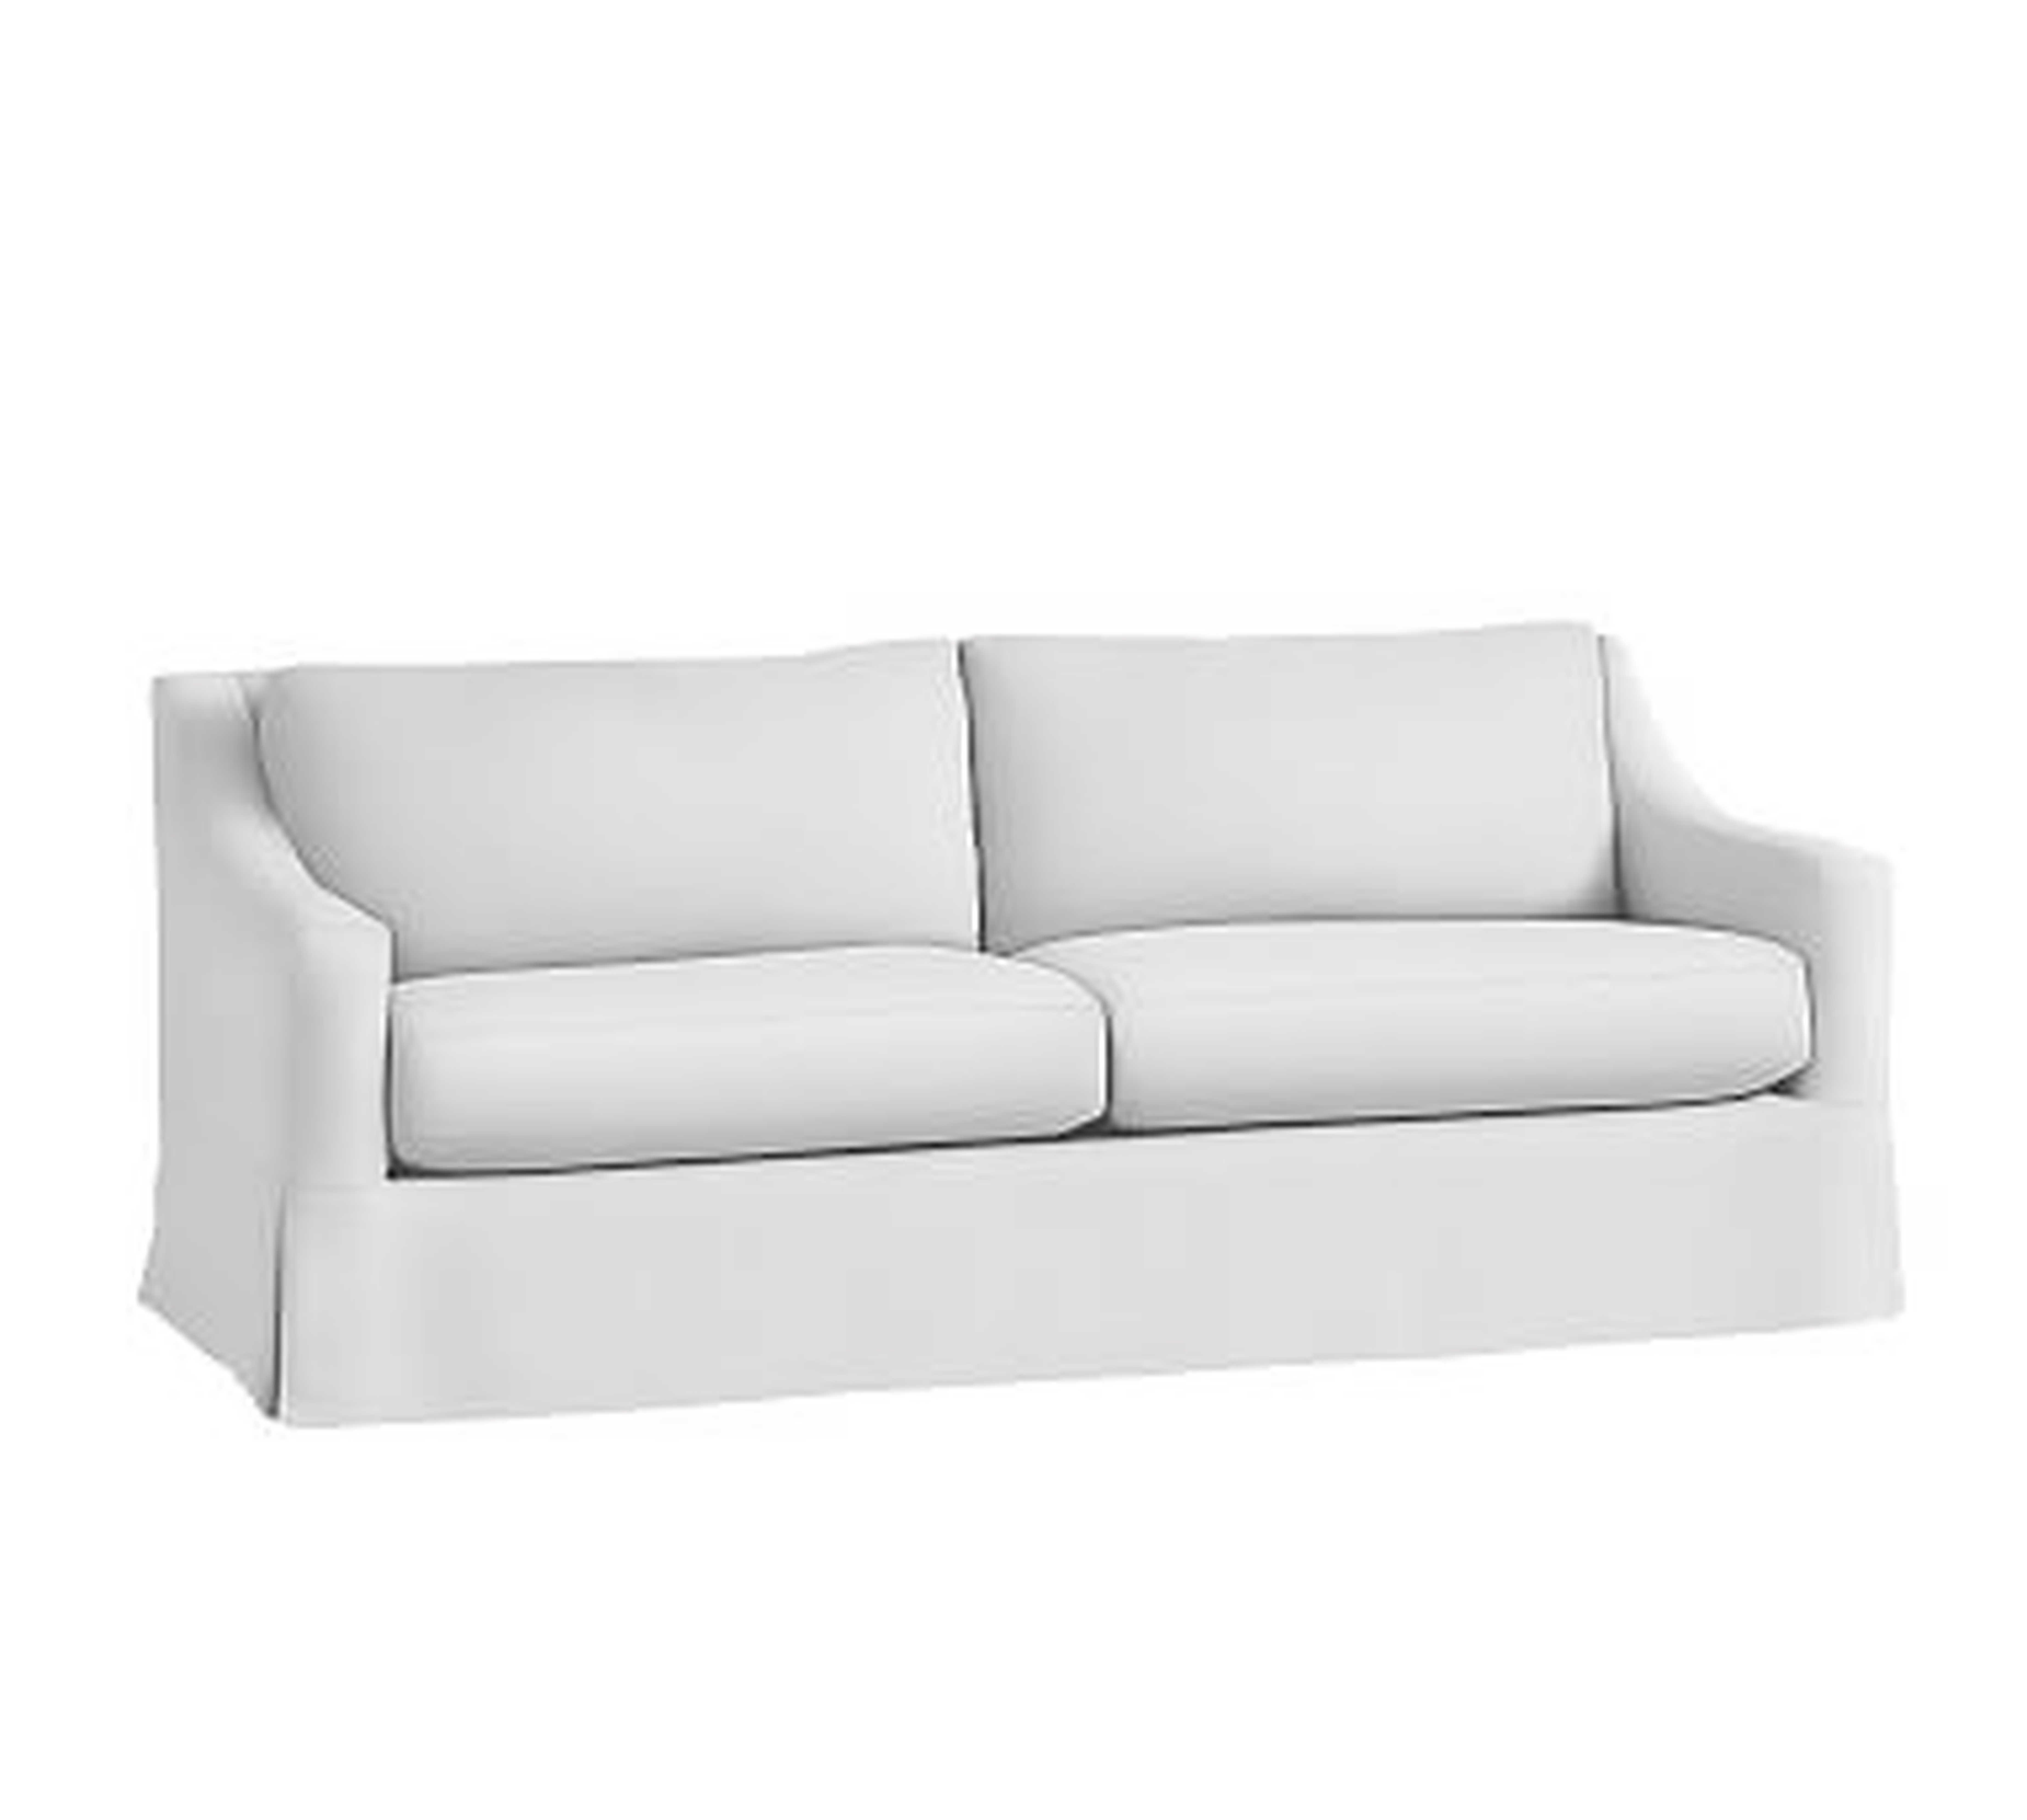 York Slope Arm Slipcovered Grand Sofa 95", Down Blend Wrapped Cushions, Twill White - Pottery Barn